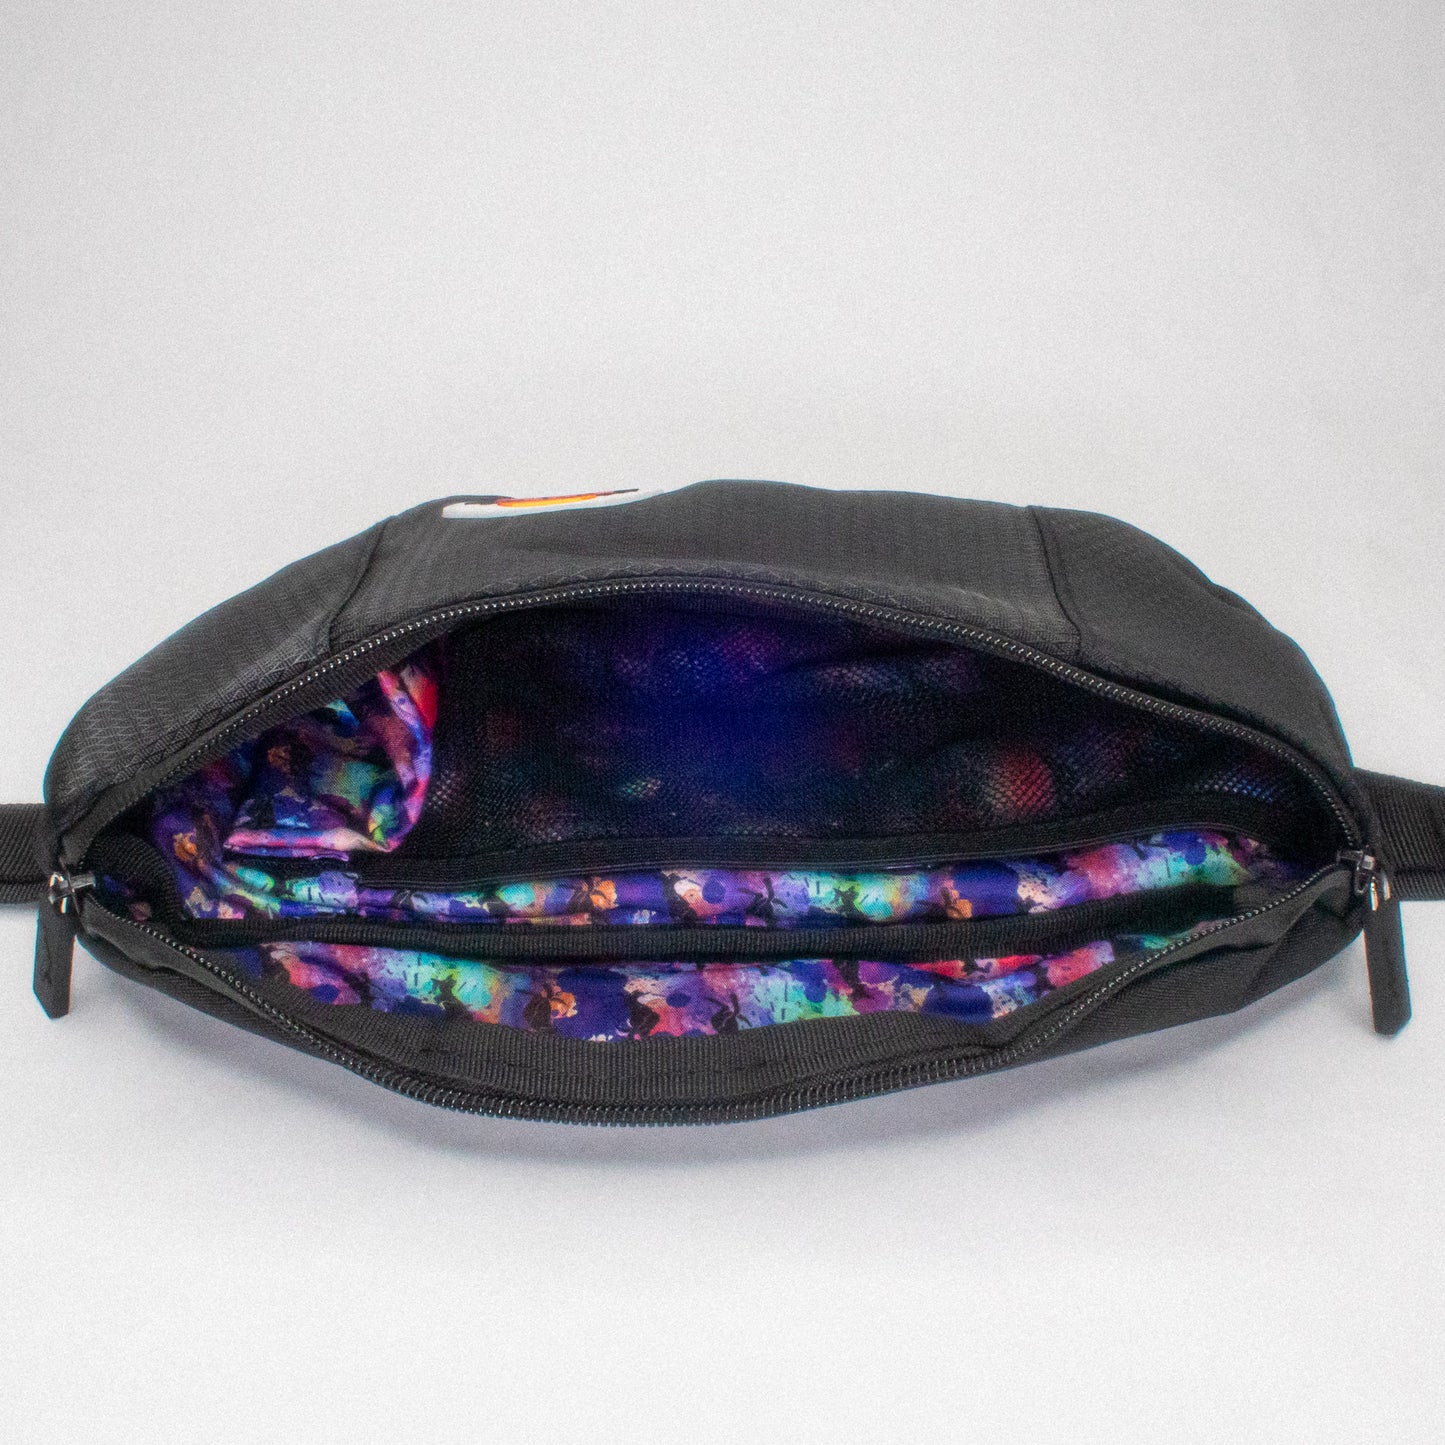 Inside 'After Midnight' 2L Fanny Pack for Festivals